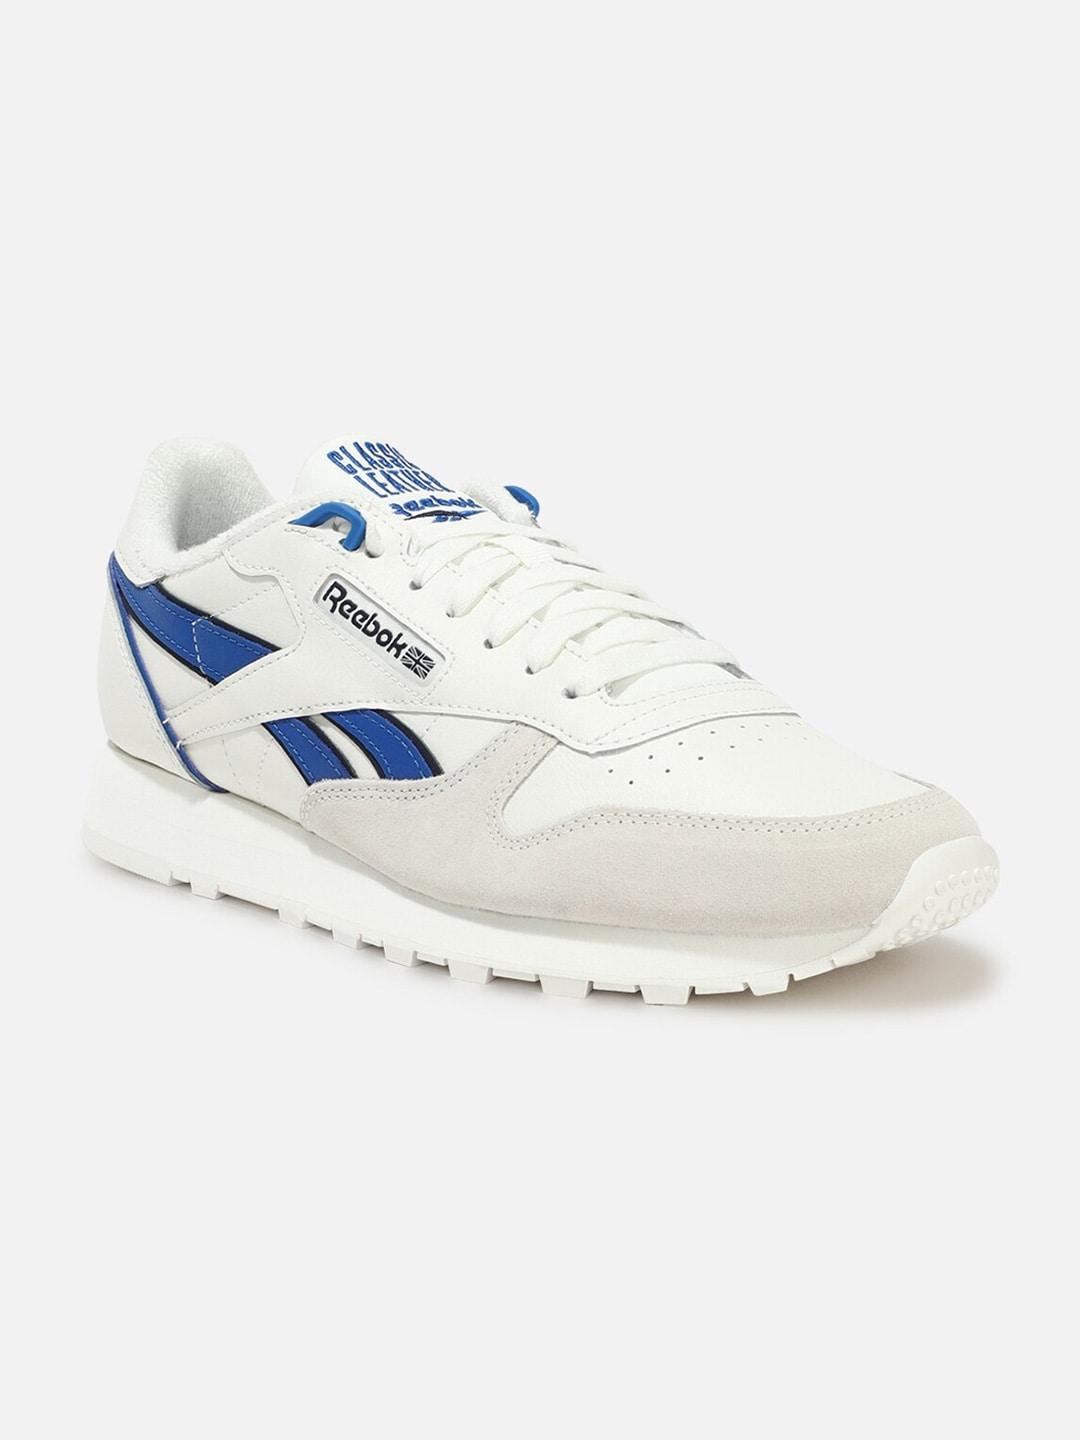 reebok-men-classic-leather-running-shoes